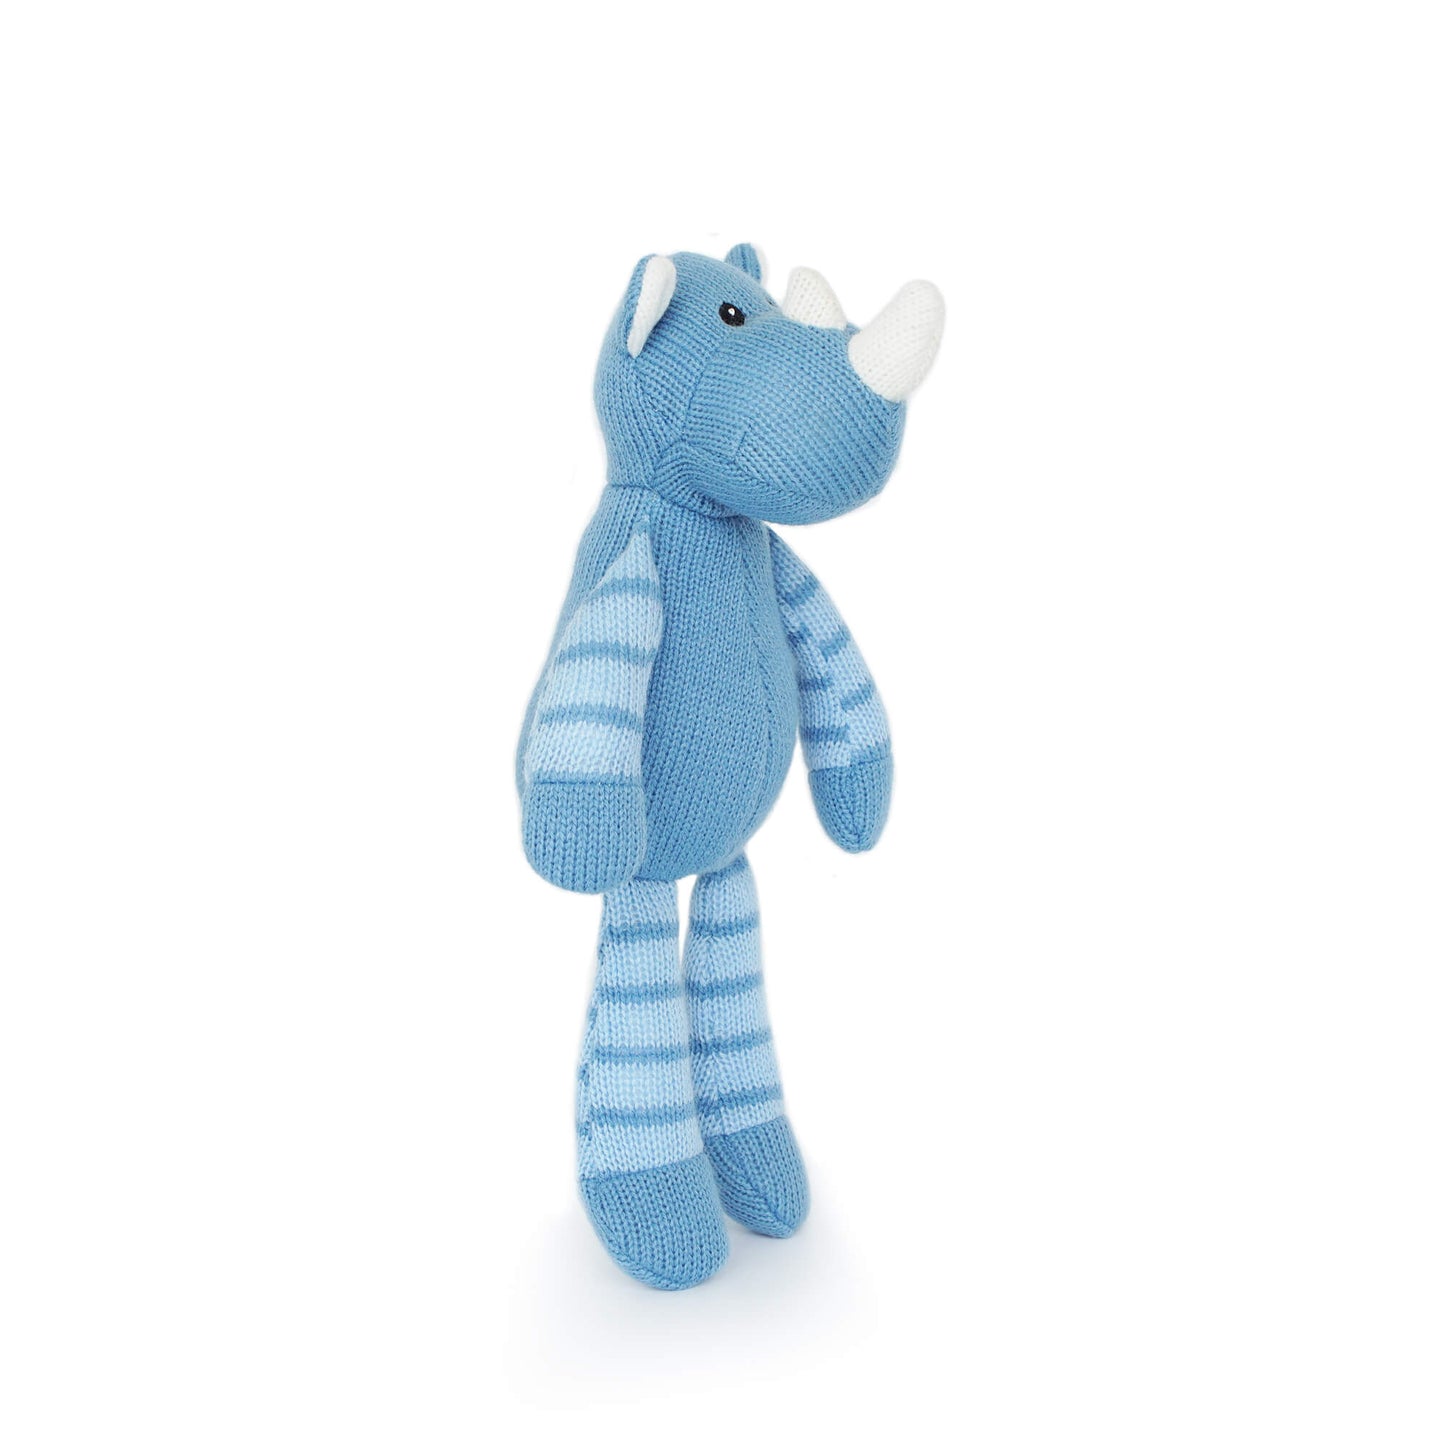 Hippo blue horn knitted animal toy PlushThis